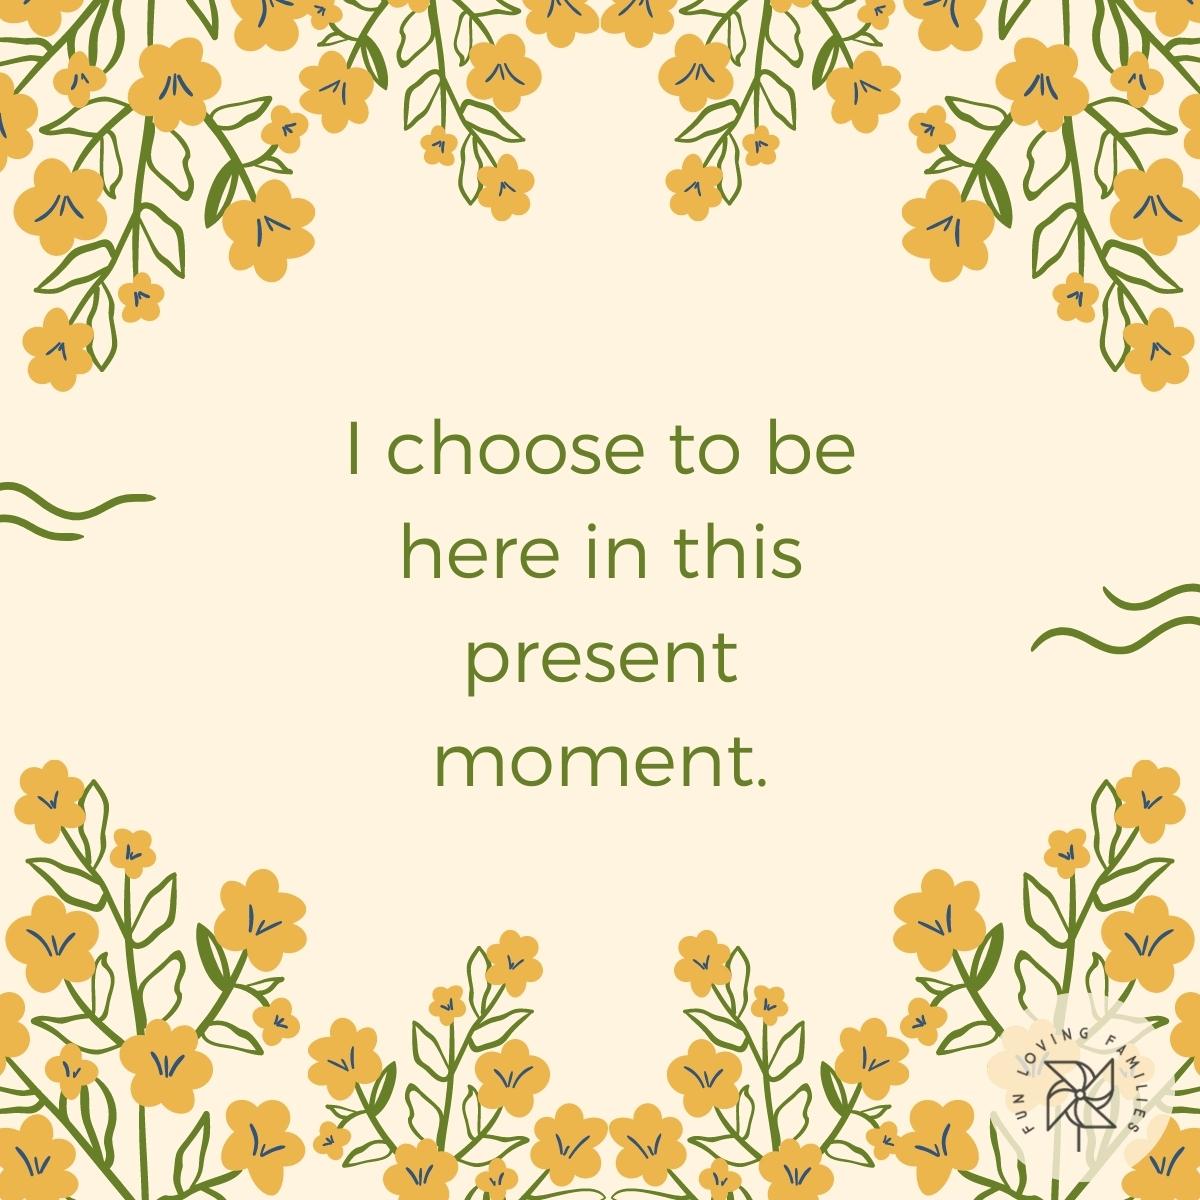 I choose to be here in this present moment affirmation